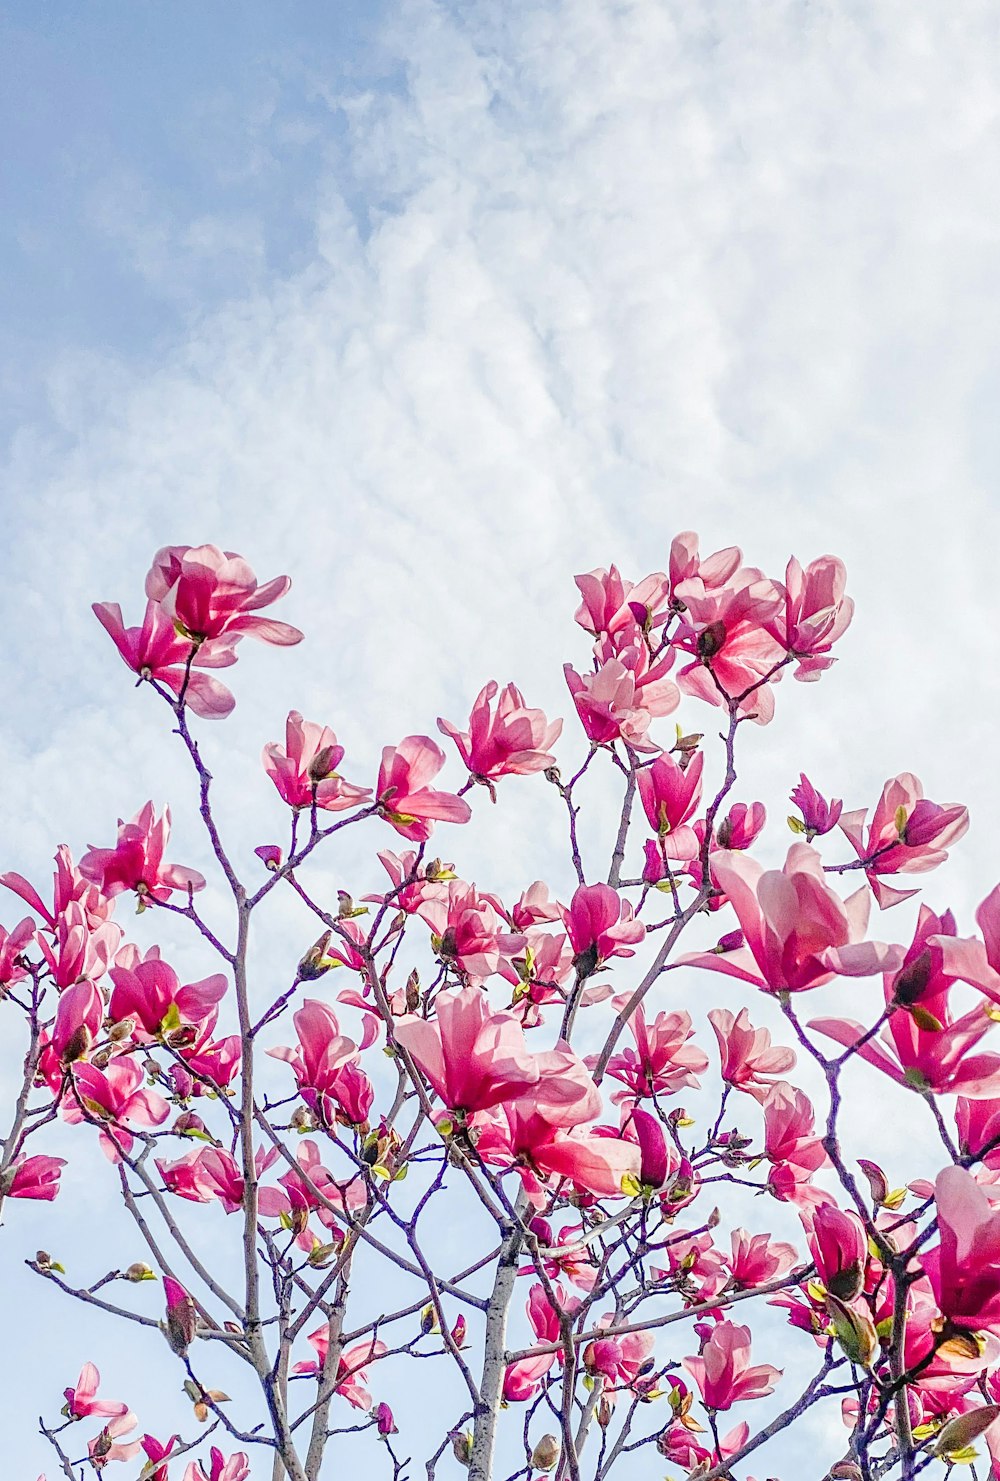 pink flowers under white clouds during daytime